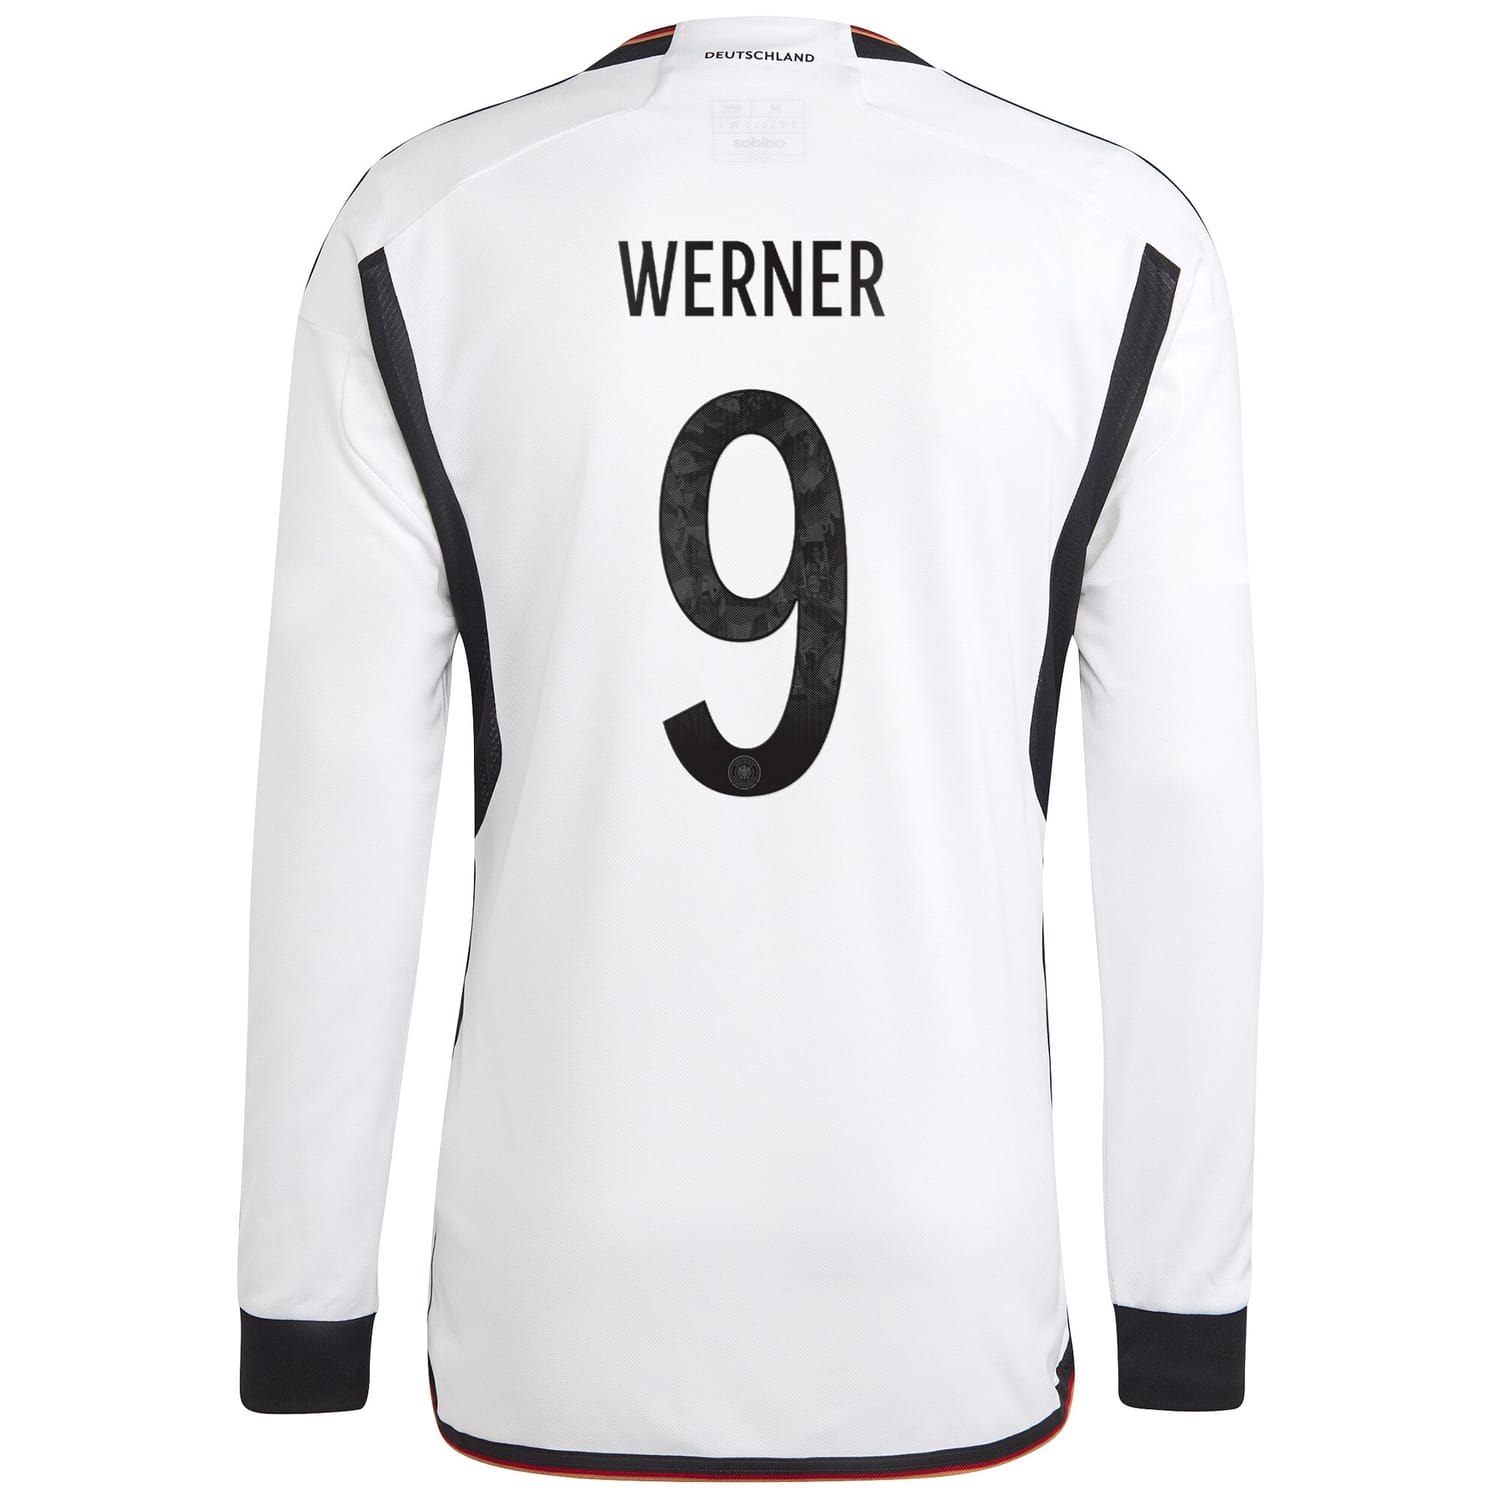 Germany National Team Jersey Shirt Long Sleeve White 2022-23 player Timo Werner printing for Men